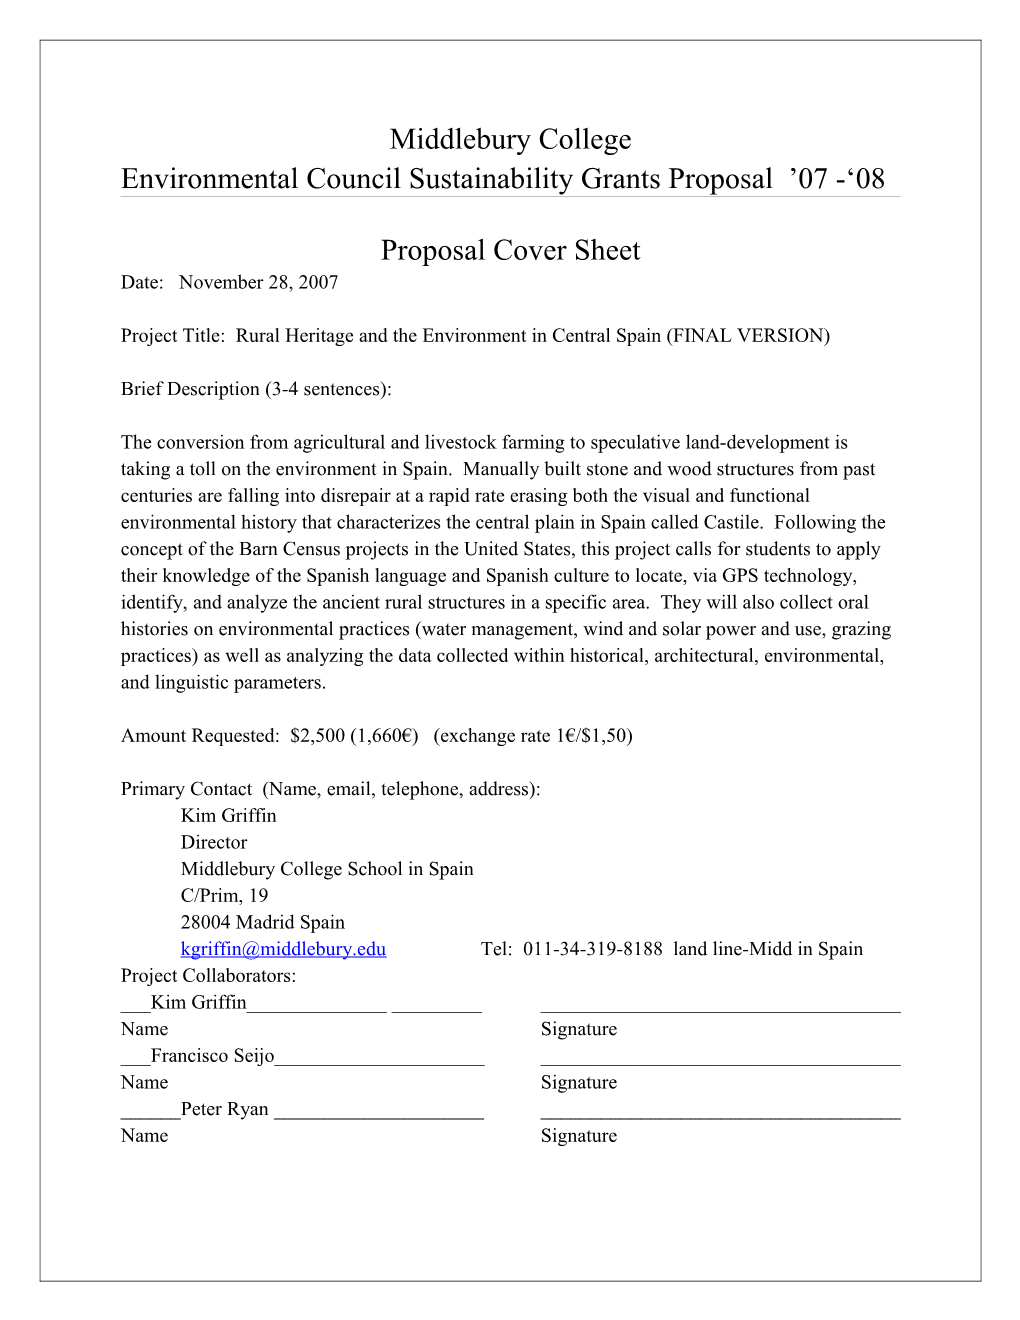 Environmental Council Sustainability Grants Proposal Form